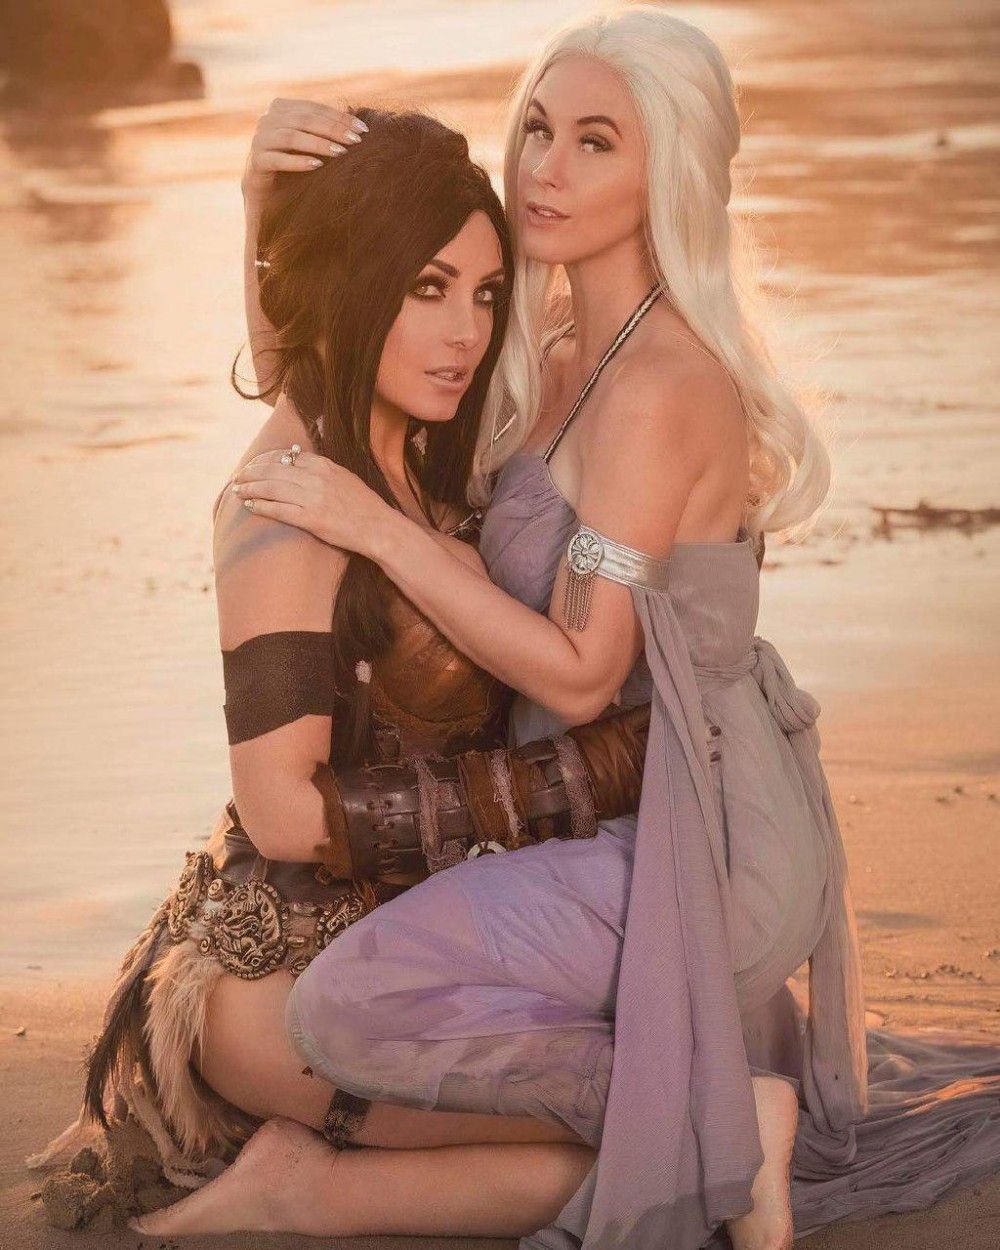 13. Game Of Thrones By Nigri And Megturney